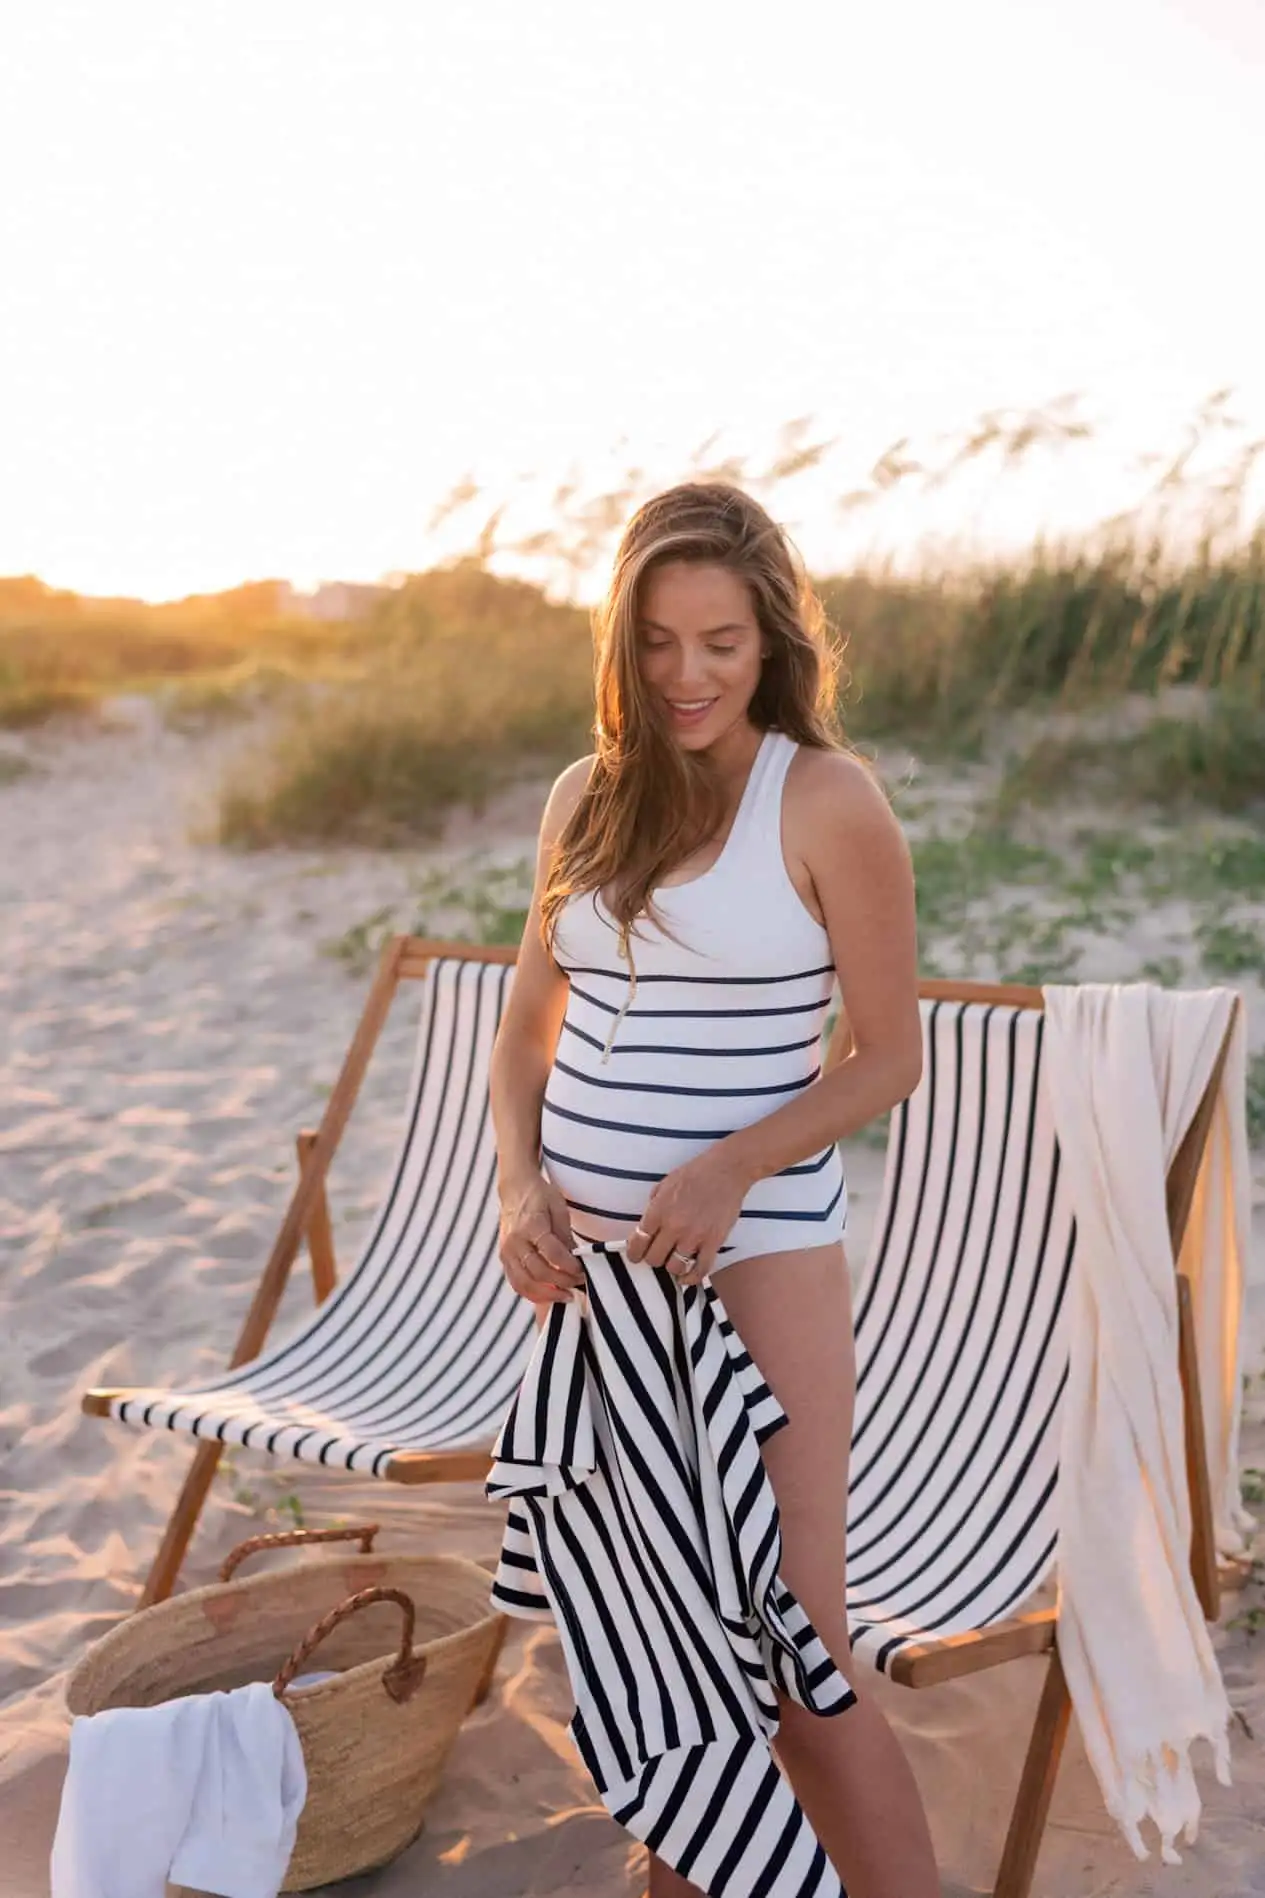 Beach Maternity Photoshoot: Tips For Capturing the Magic Moment